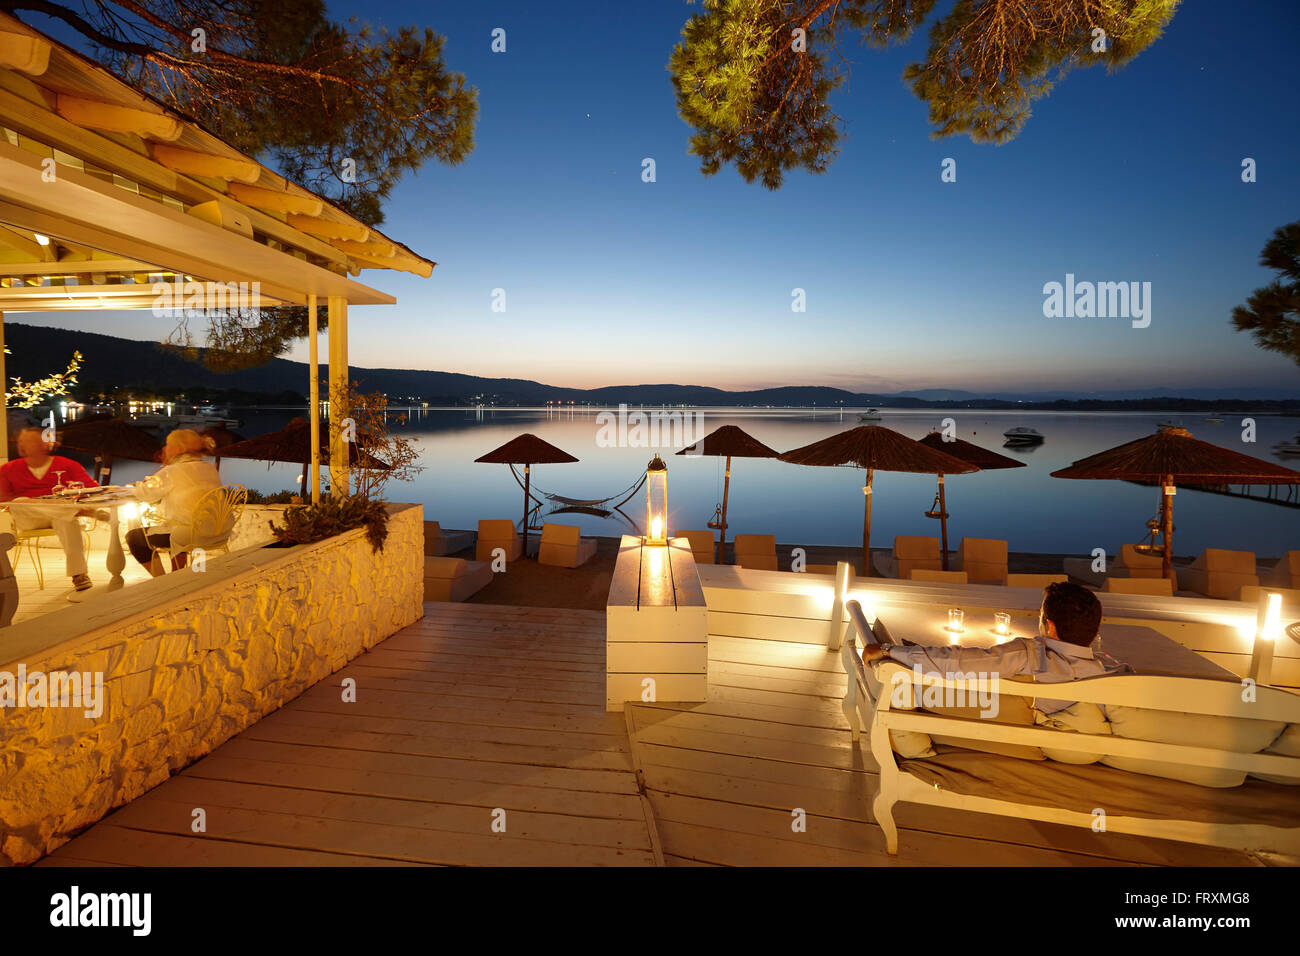 Guests in a beach bar of a hotel in the evening, Vourvourou, Sithonia, Chalkidiki, Greece Stock Photo